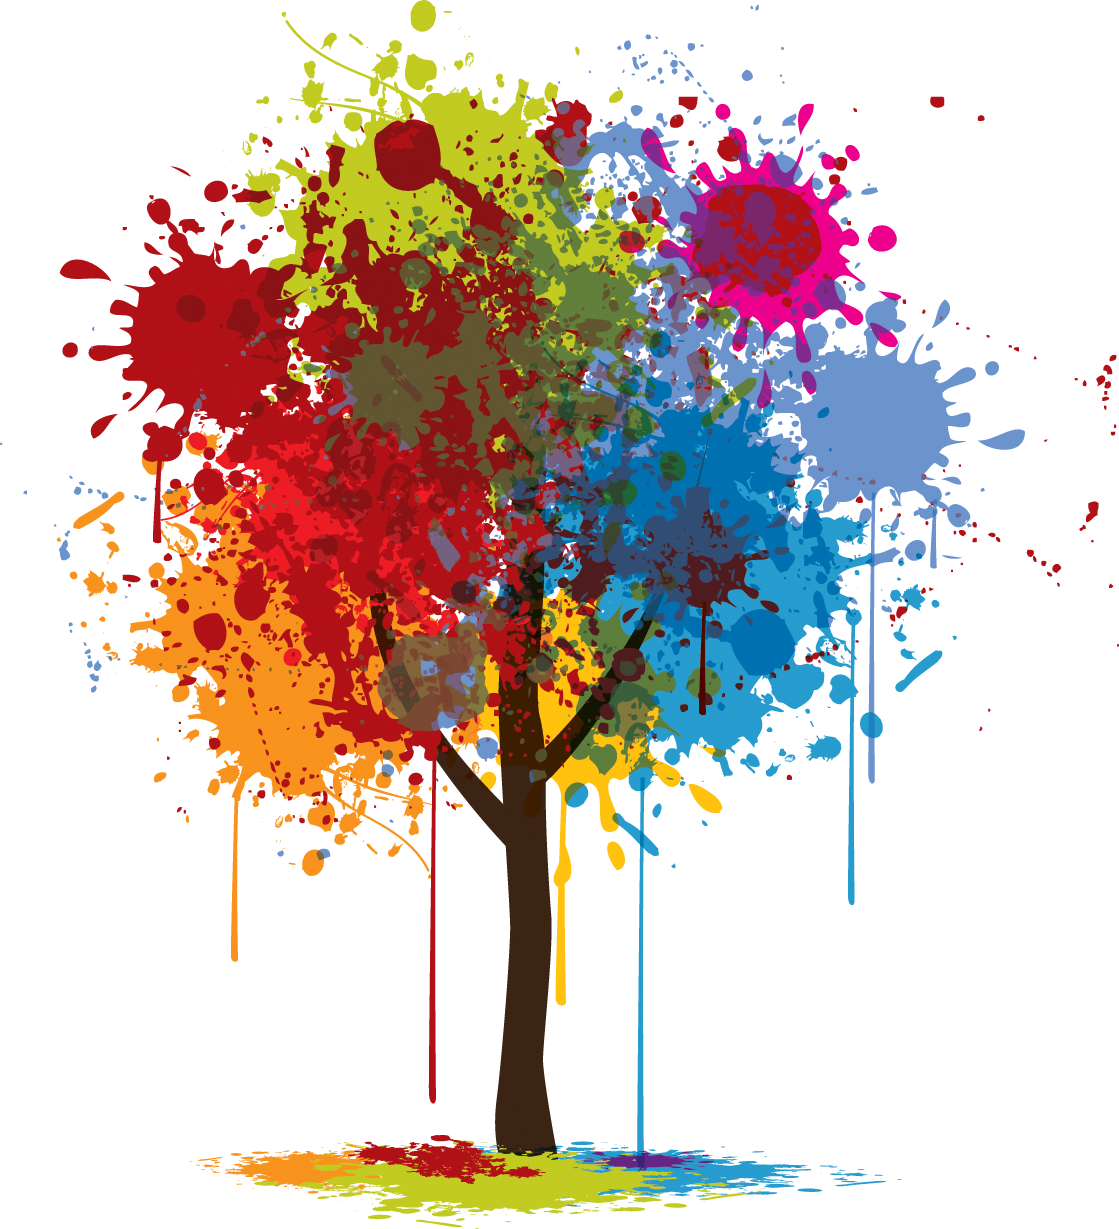 Tree with dripping splotches of color for leaves